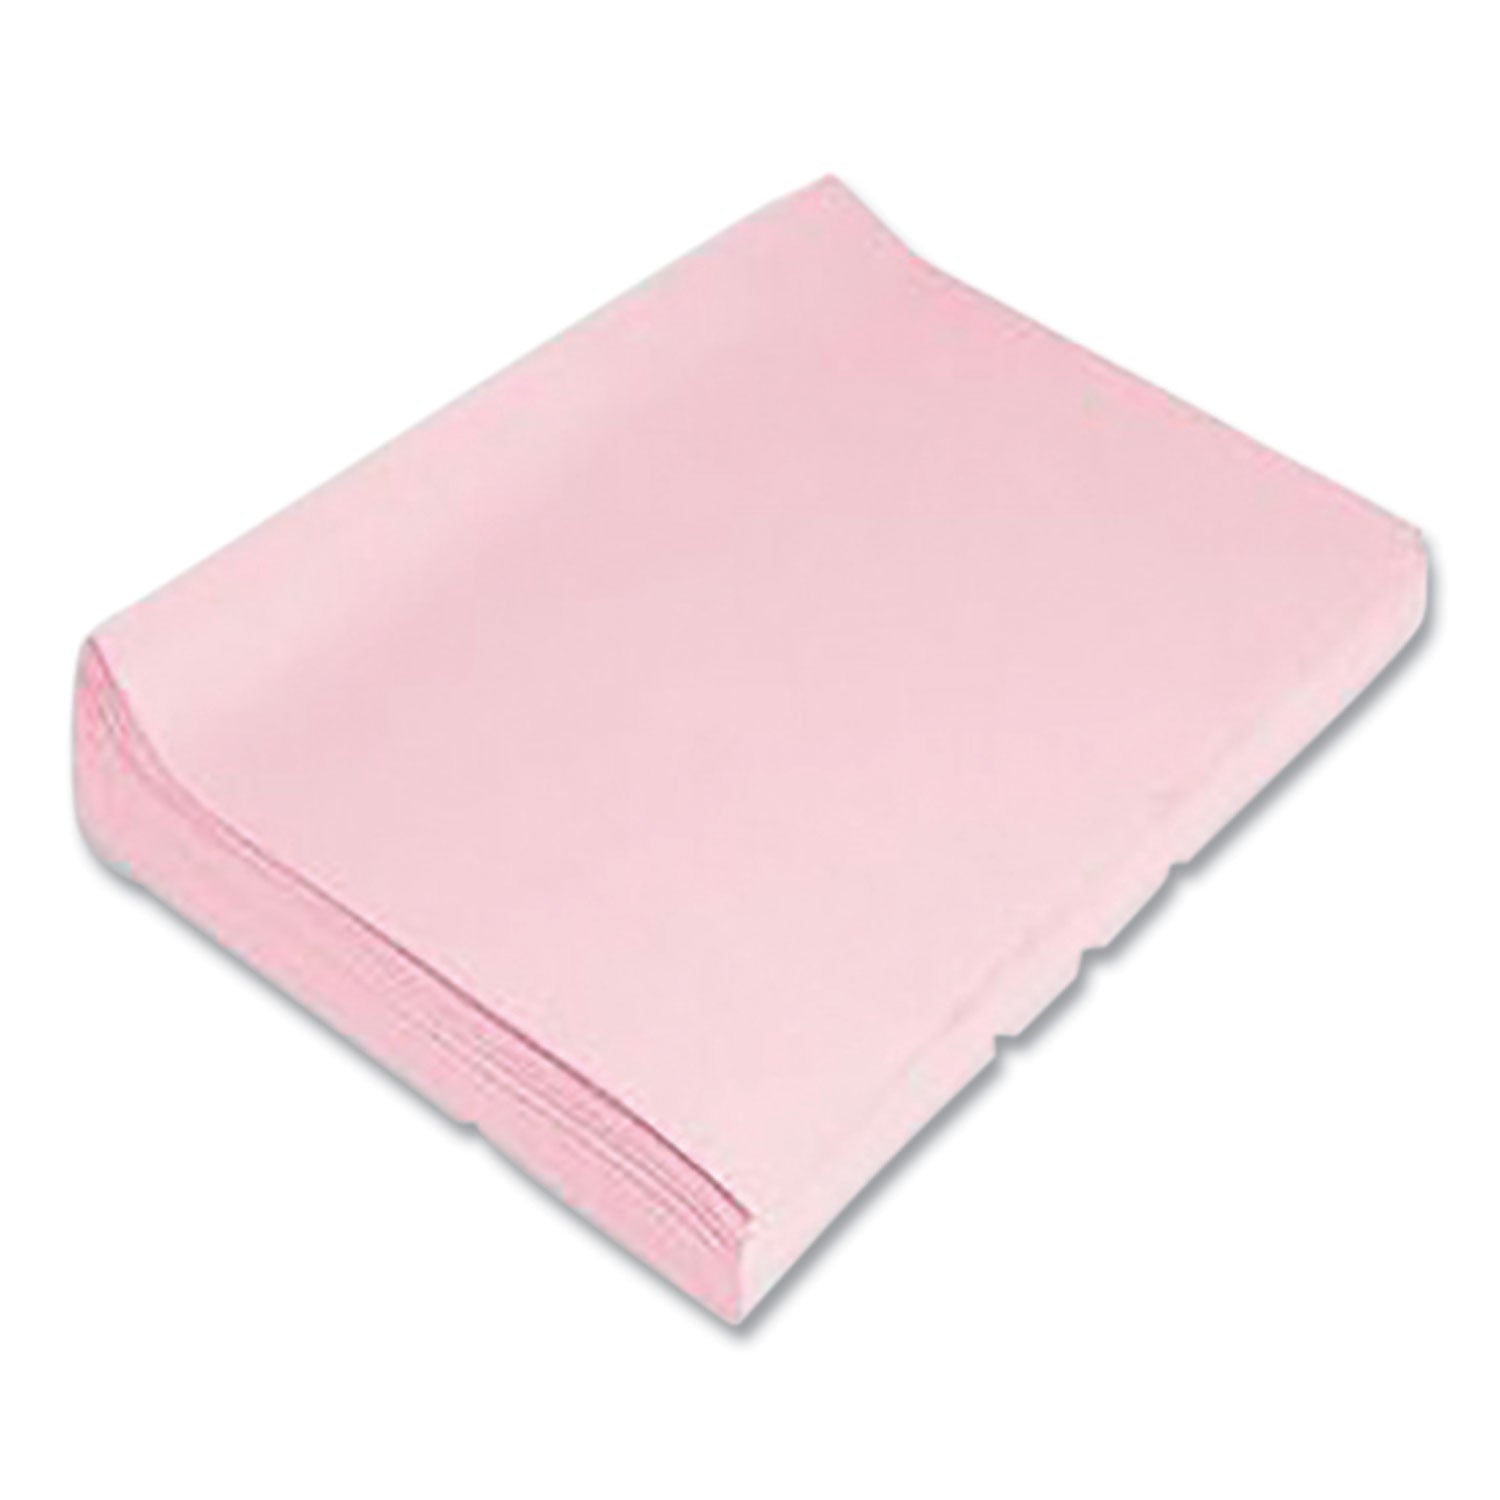 spectra-art-tissue-23-lb-tissue-weight-20-x-30-baby-pink-24-pack_pacp0059042 - 1